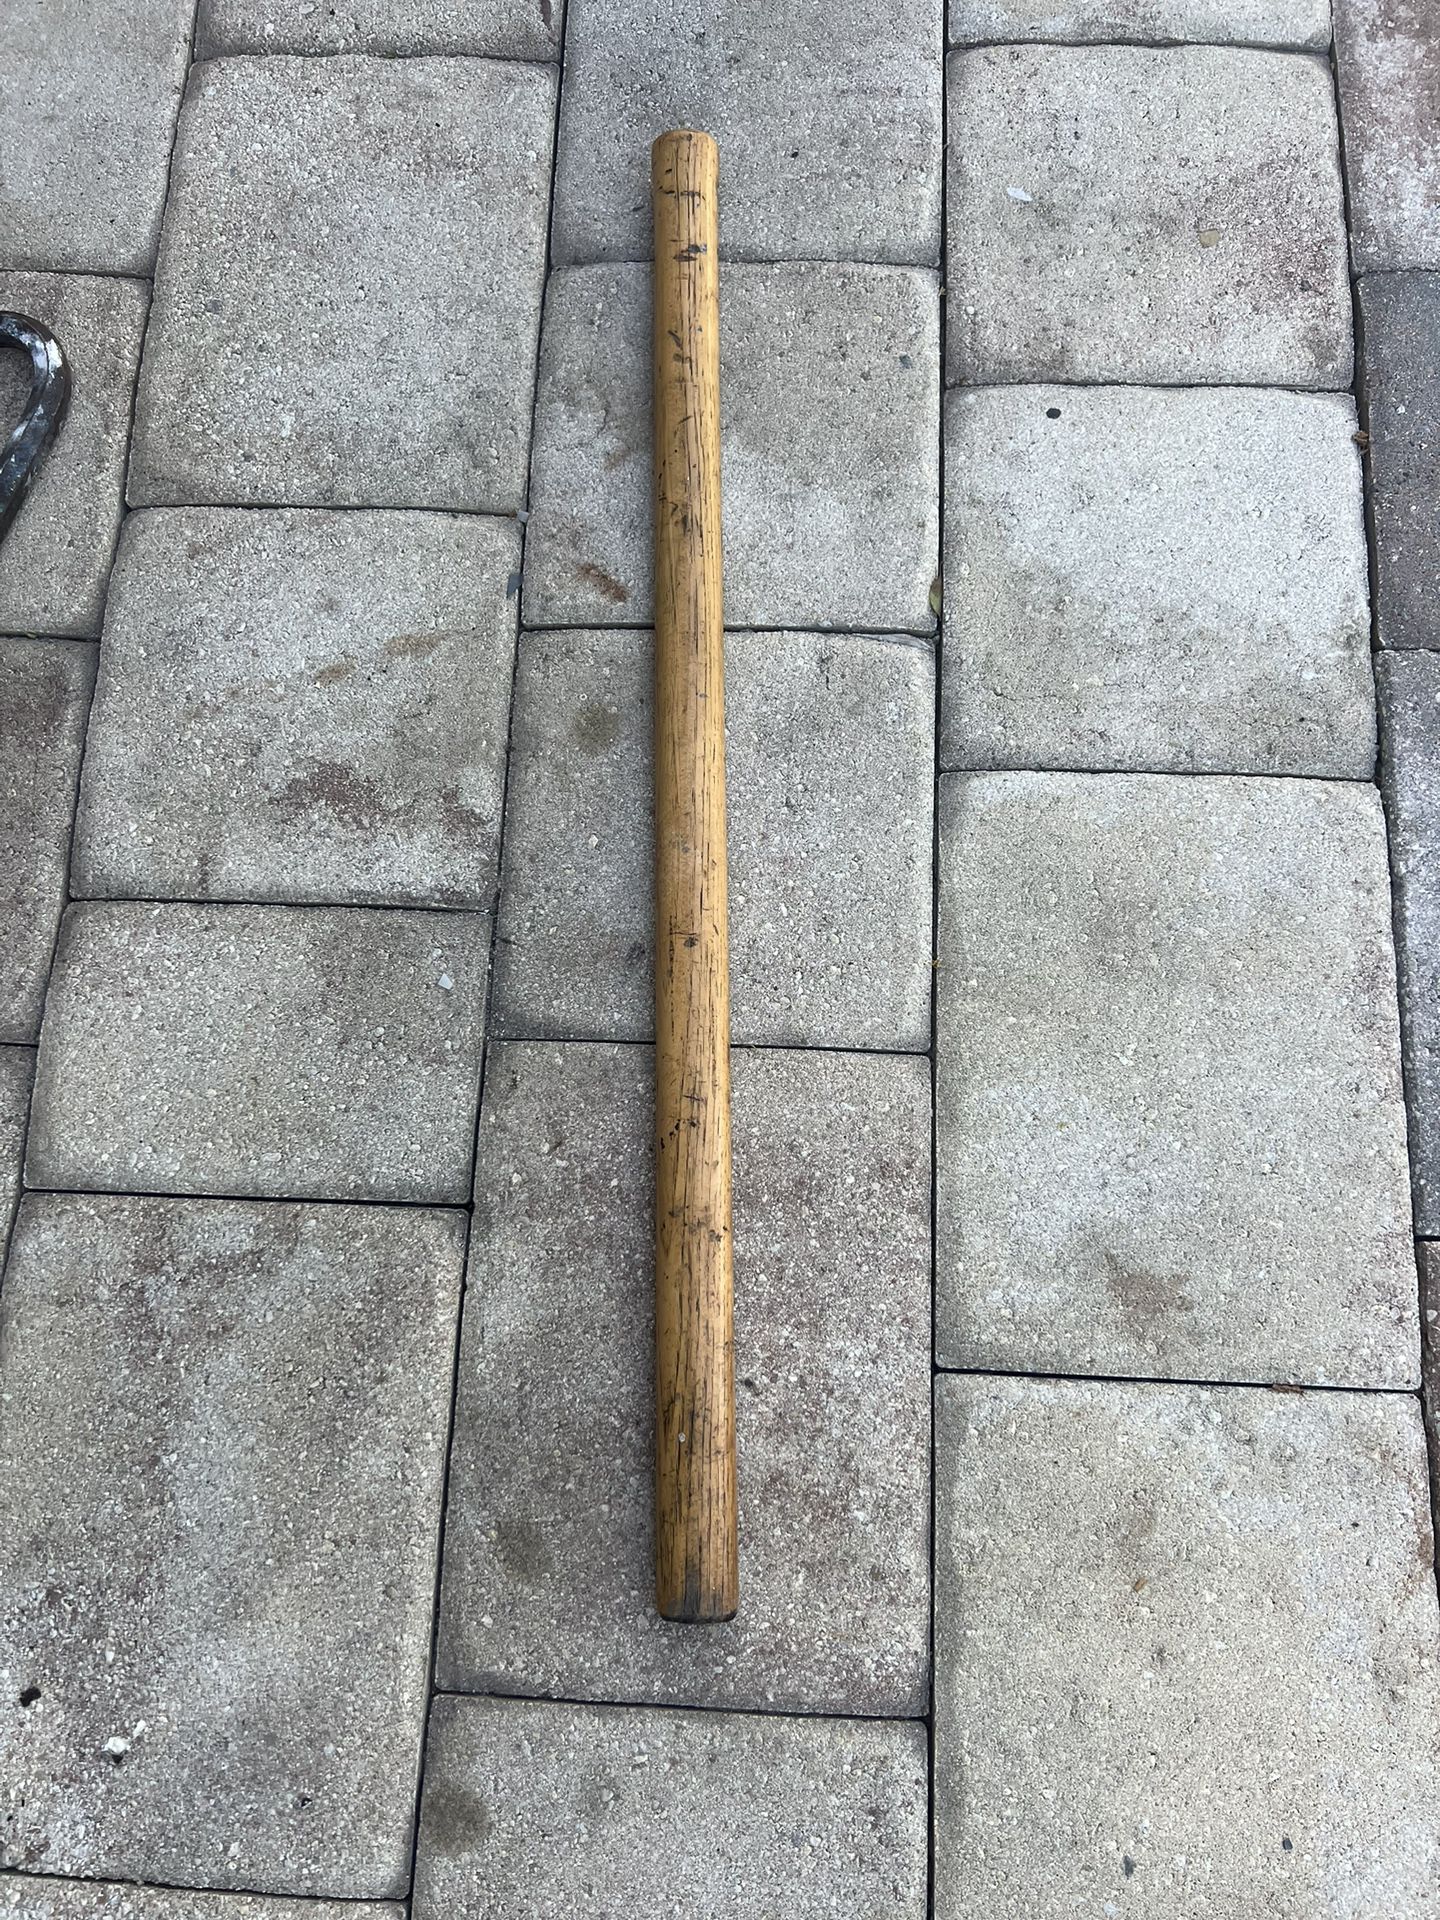 32" straight handle for 16 lb Sledge Hammers oval eye 1 1/2” x 1 1/4”